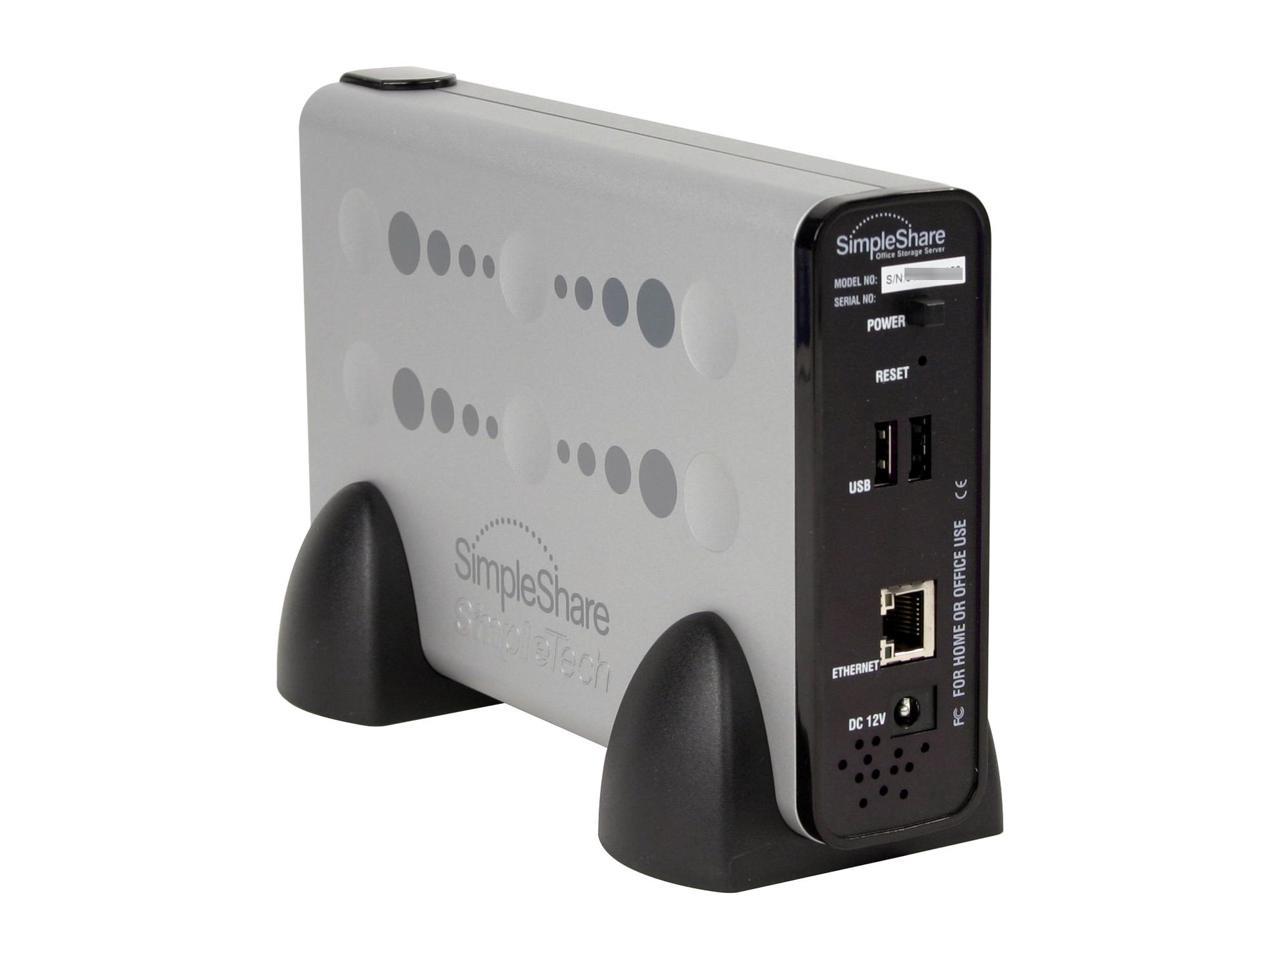 Simpletech simpleshare nas finder download